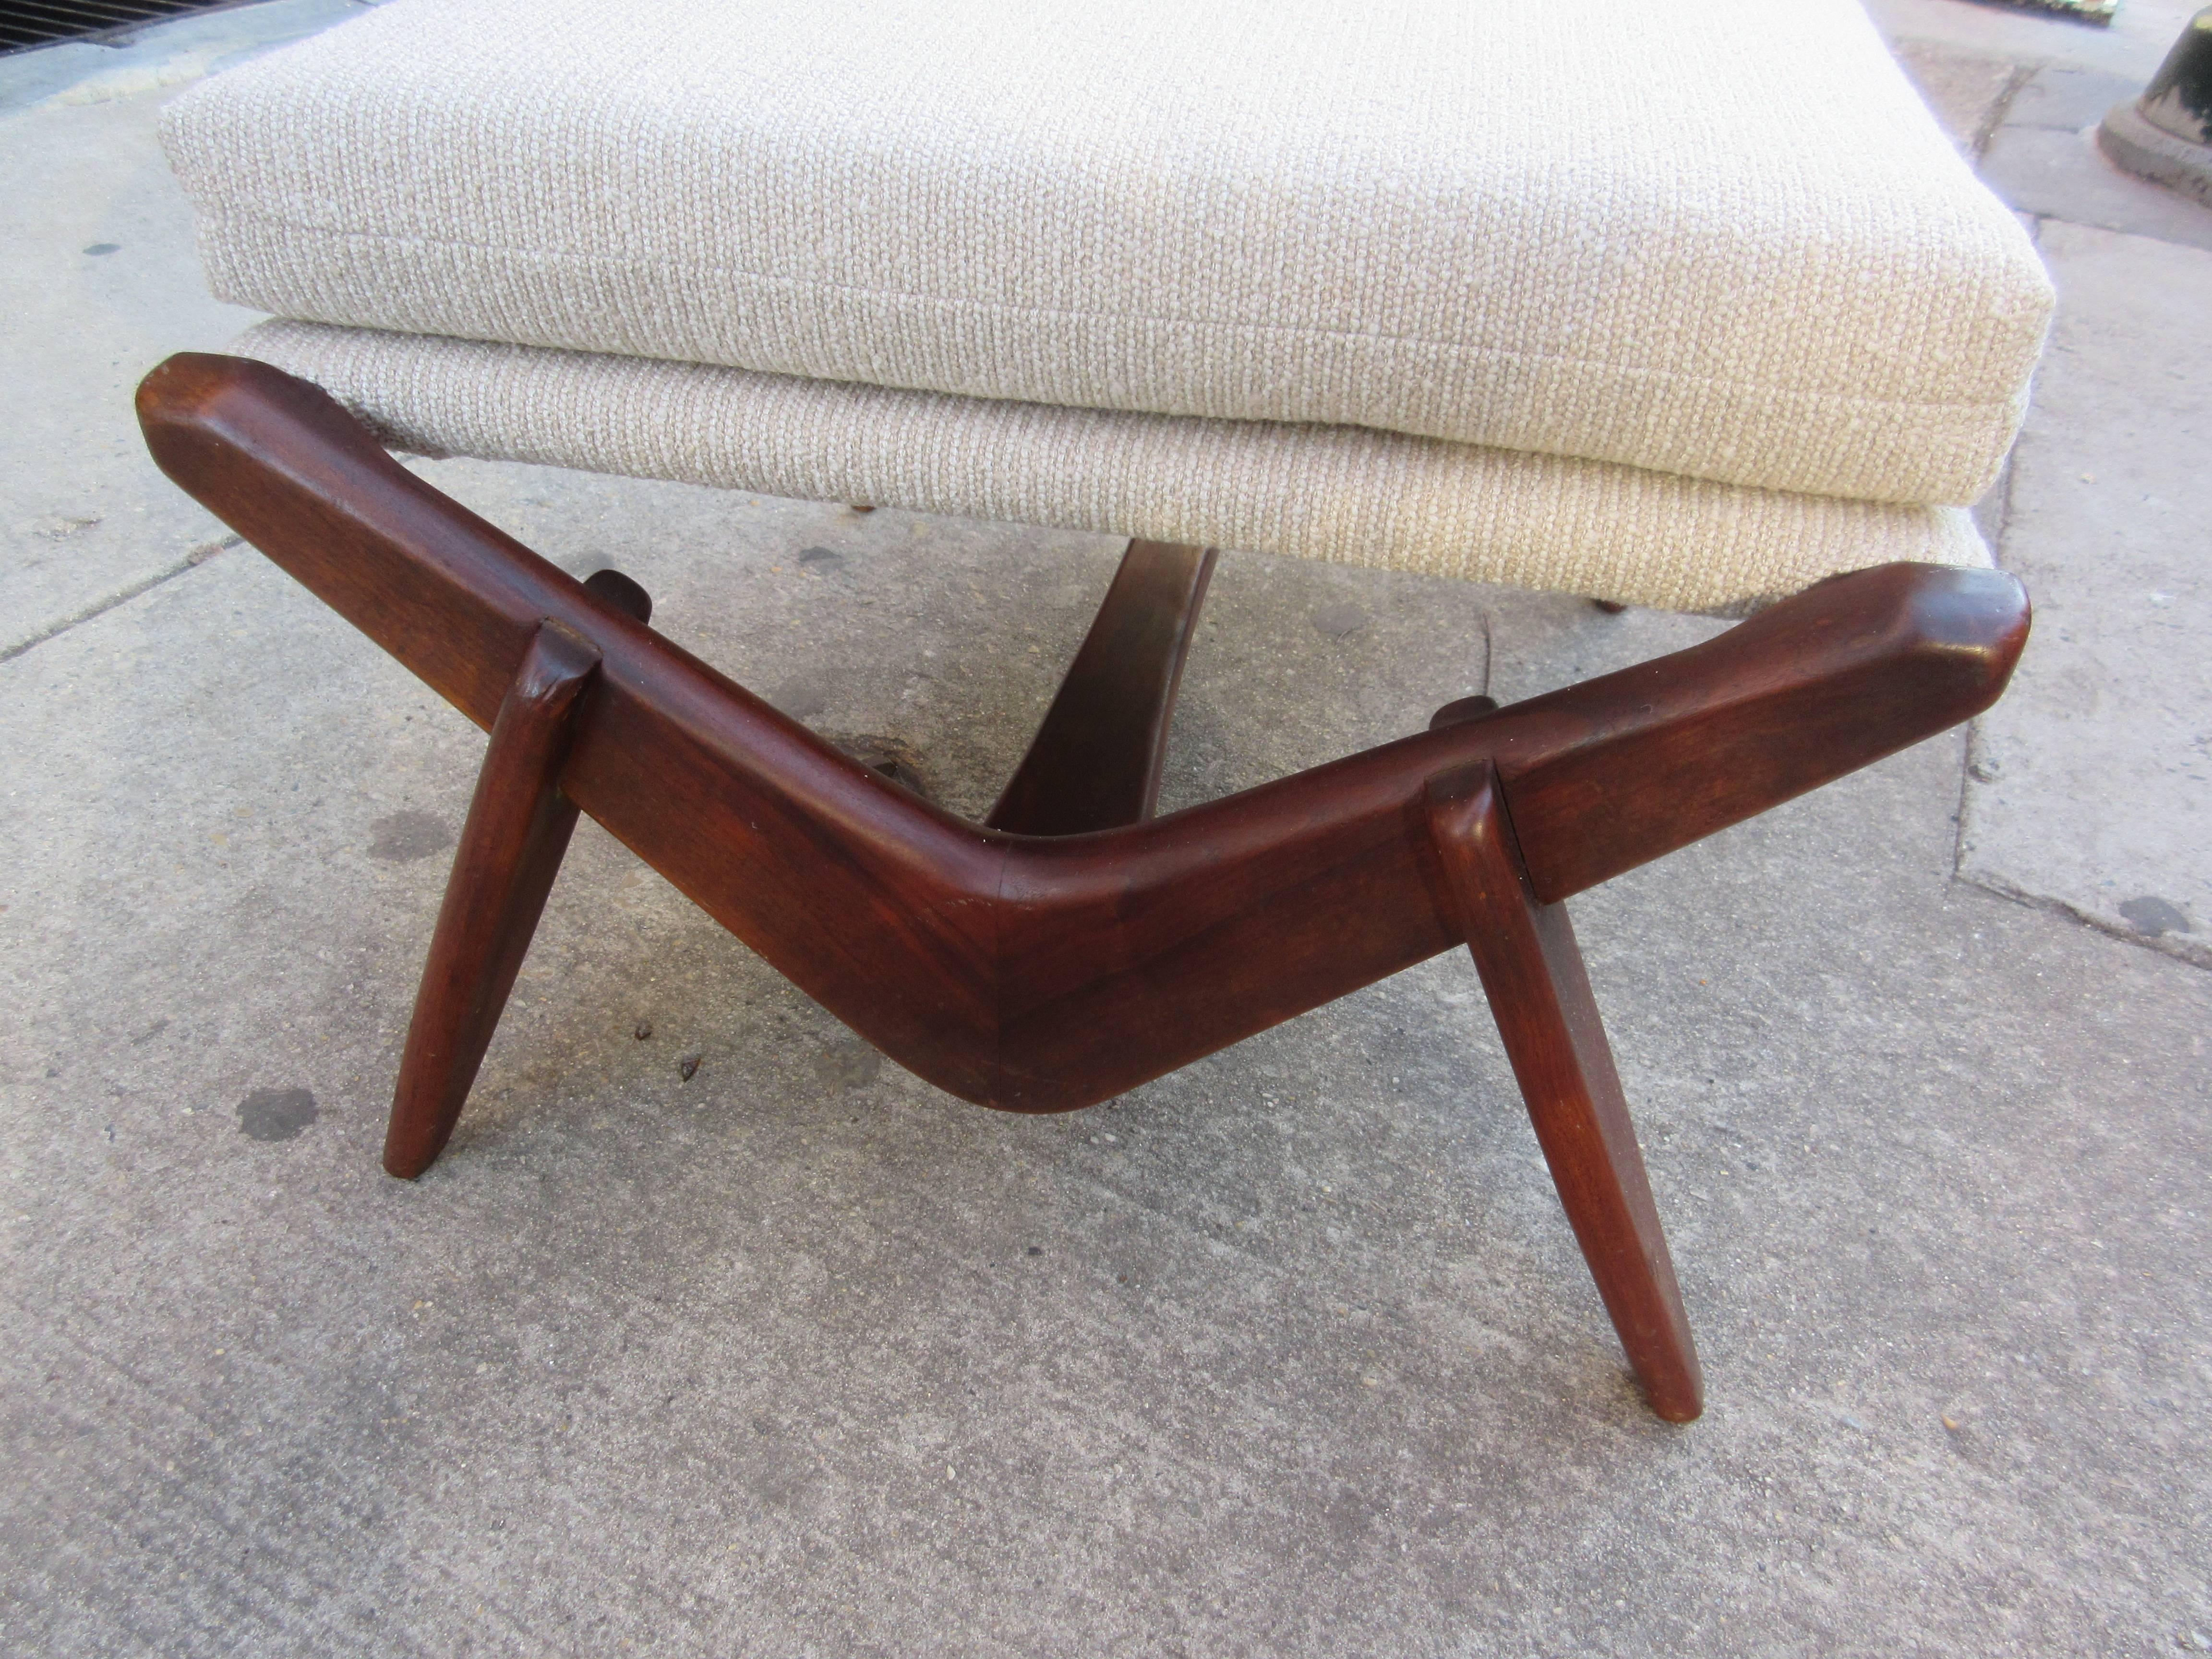 Solid walnut stool or ottoman with newly redone straps and fabric. Danish? Swedish? American?